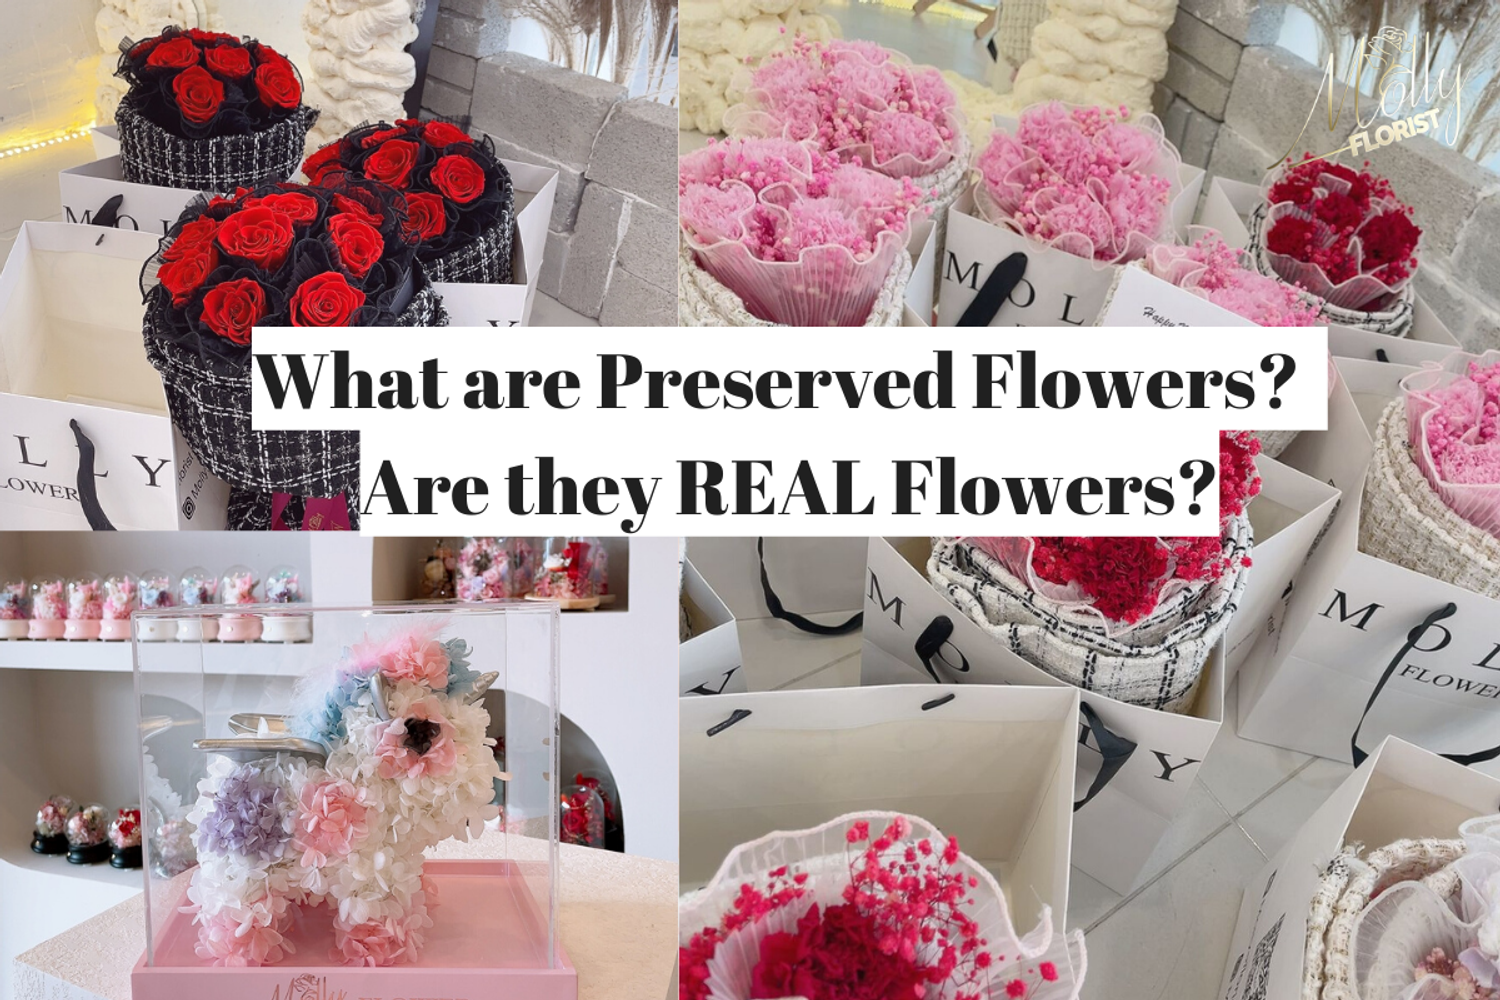 www.mollyflorist.com - What are Preserved Flowers?  Are they REAL Flowers?